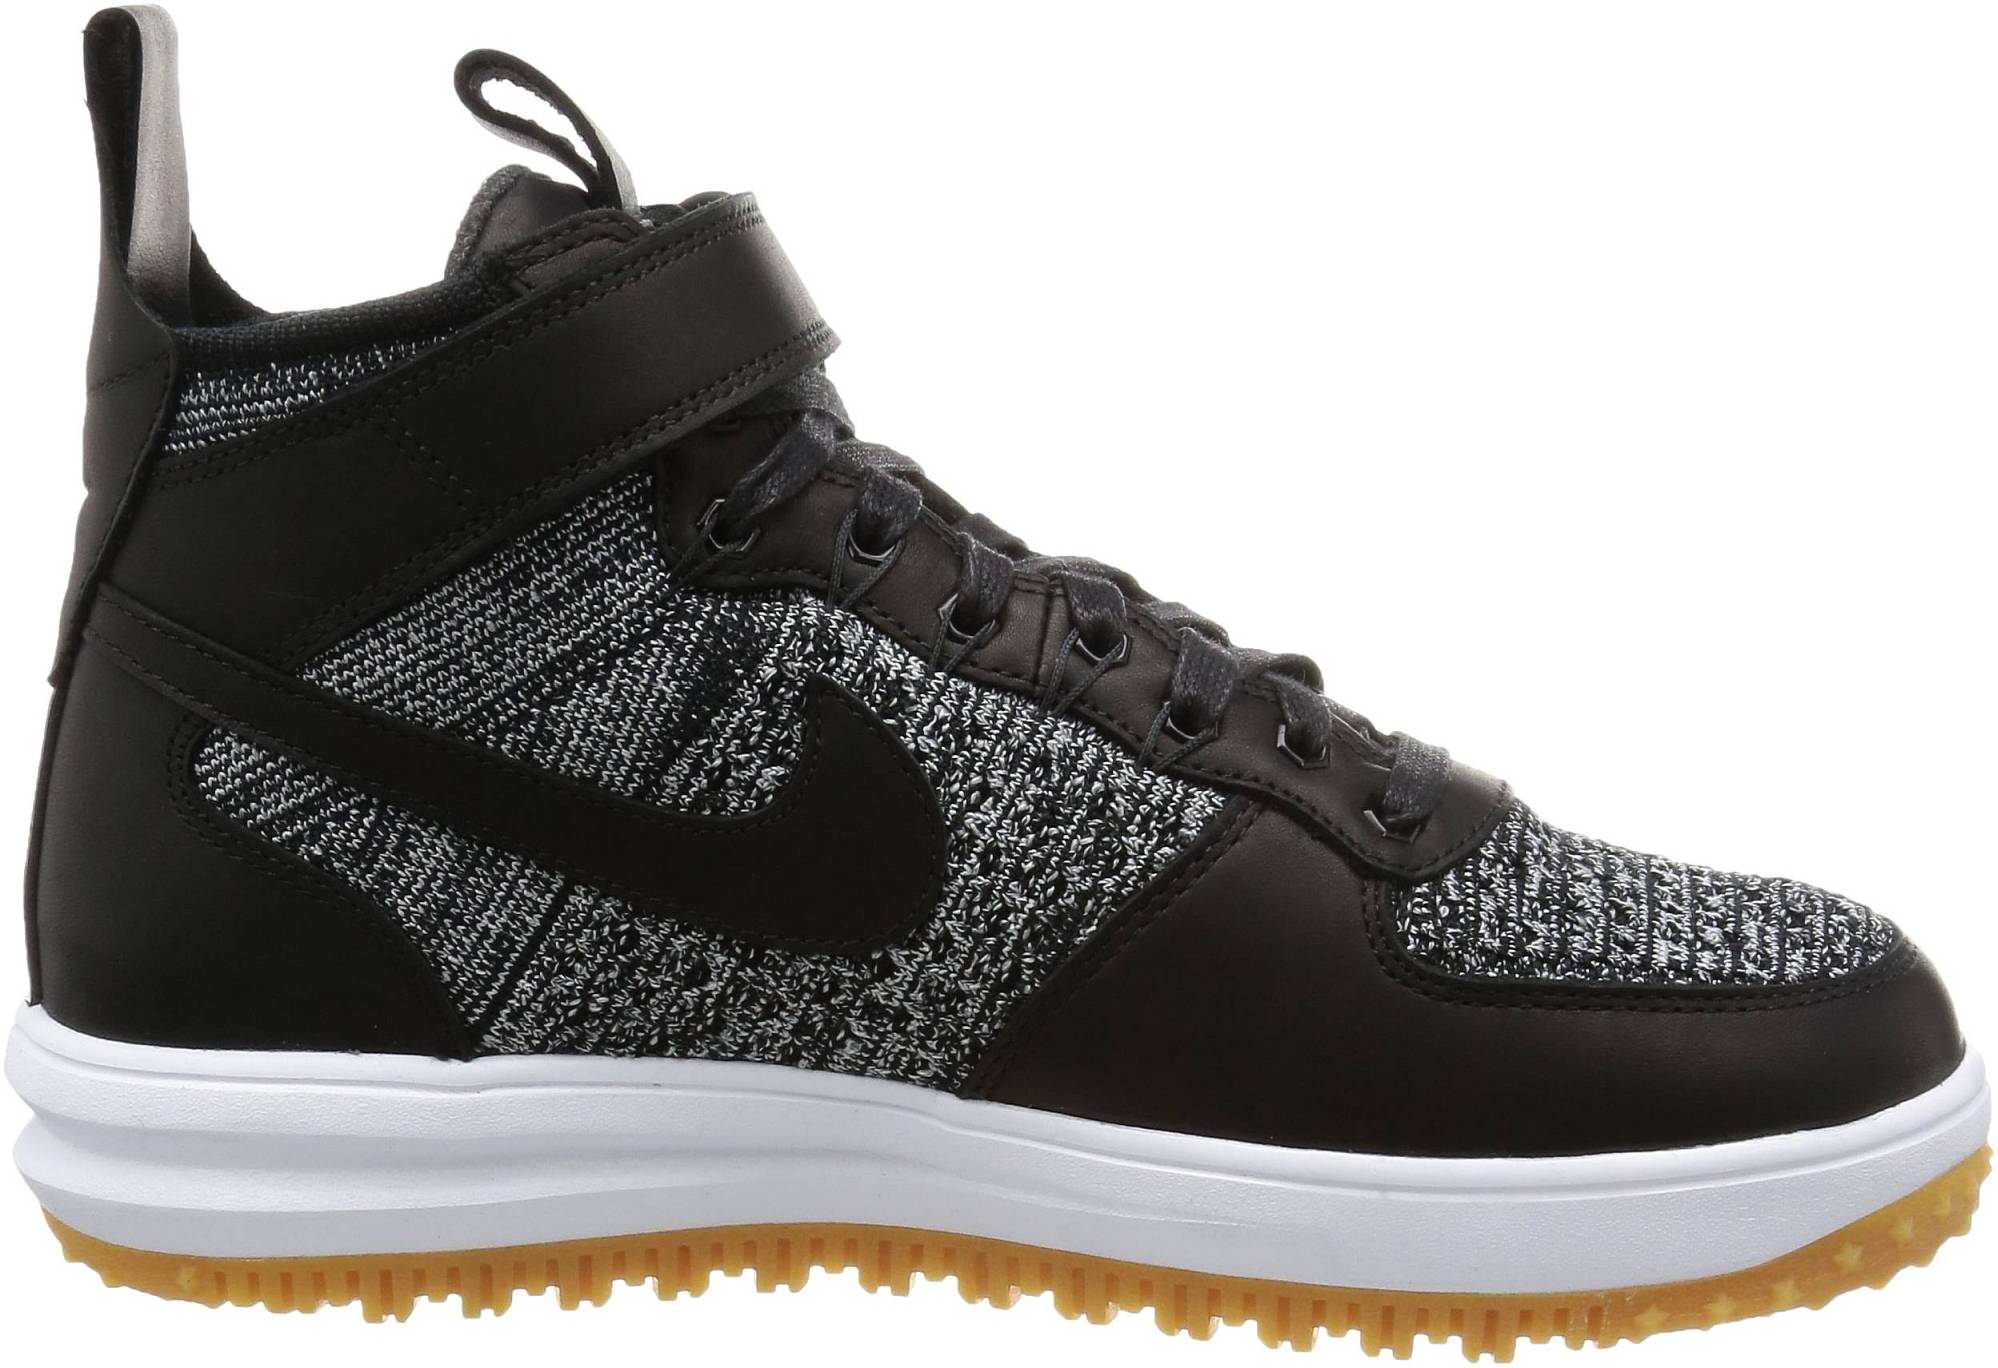 Nike Lunar Force 1 Flyknit Workboot – Shoes Reviews & Reasons To Buy